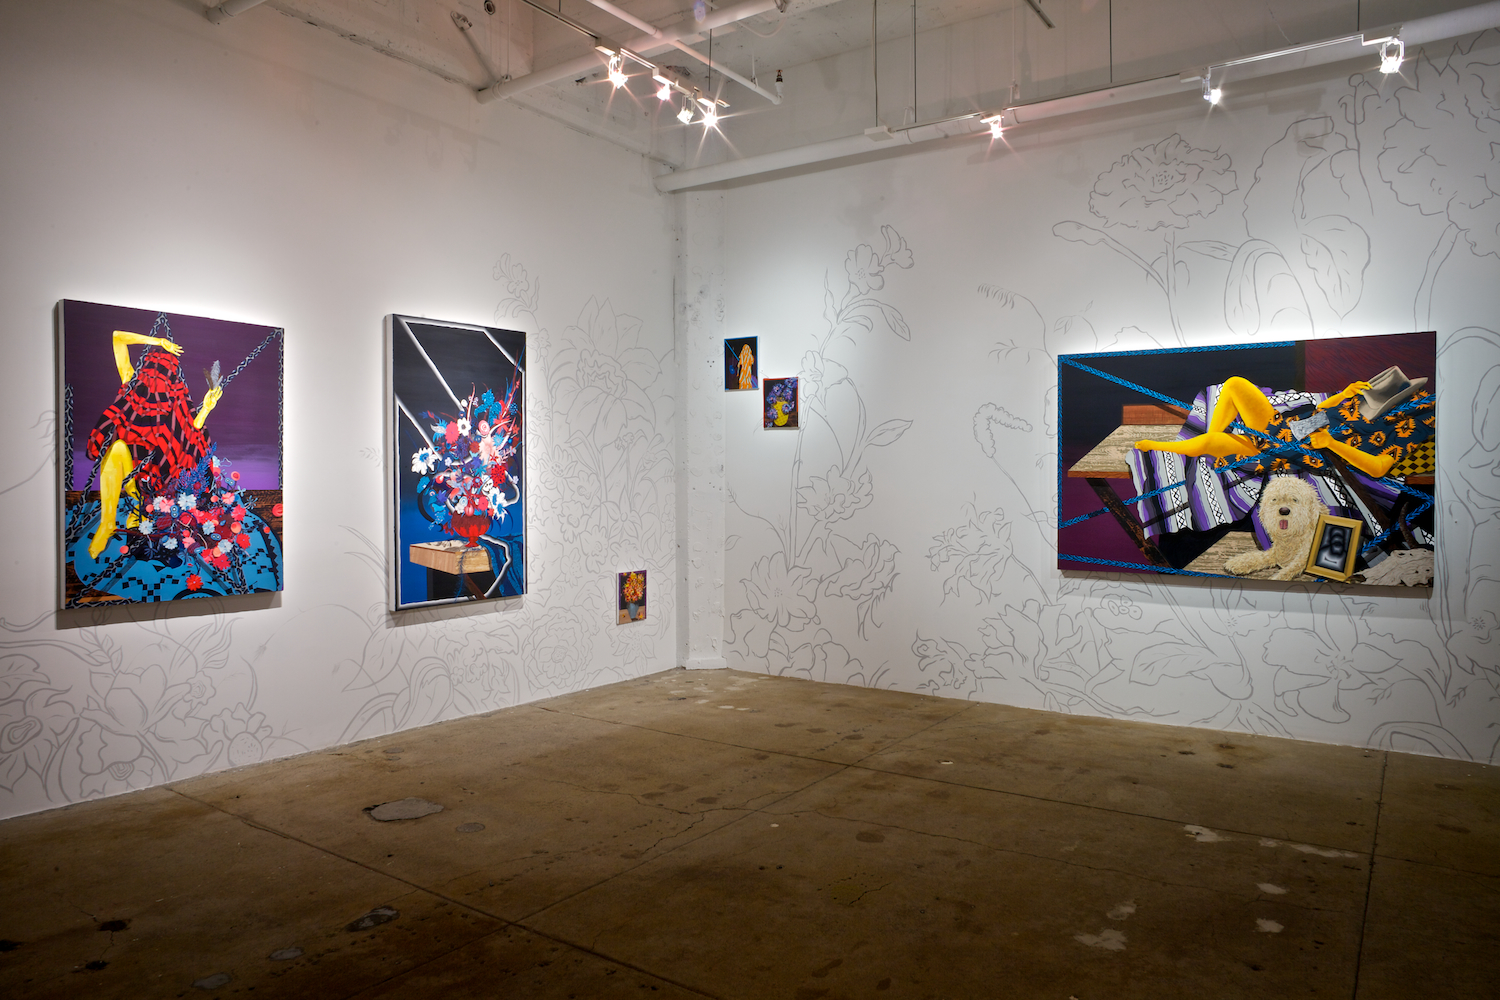   Amir H. Fallah: The Collected,  installation view, Gallery Wendi Norris, San Francisco, CA, March 14 — April 27, 2013 